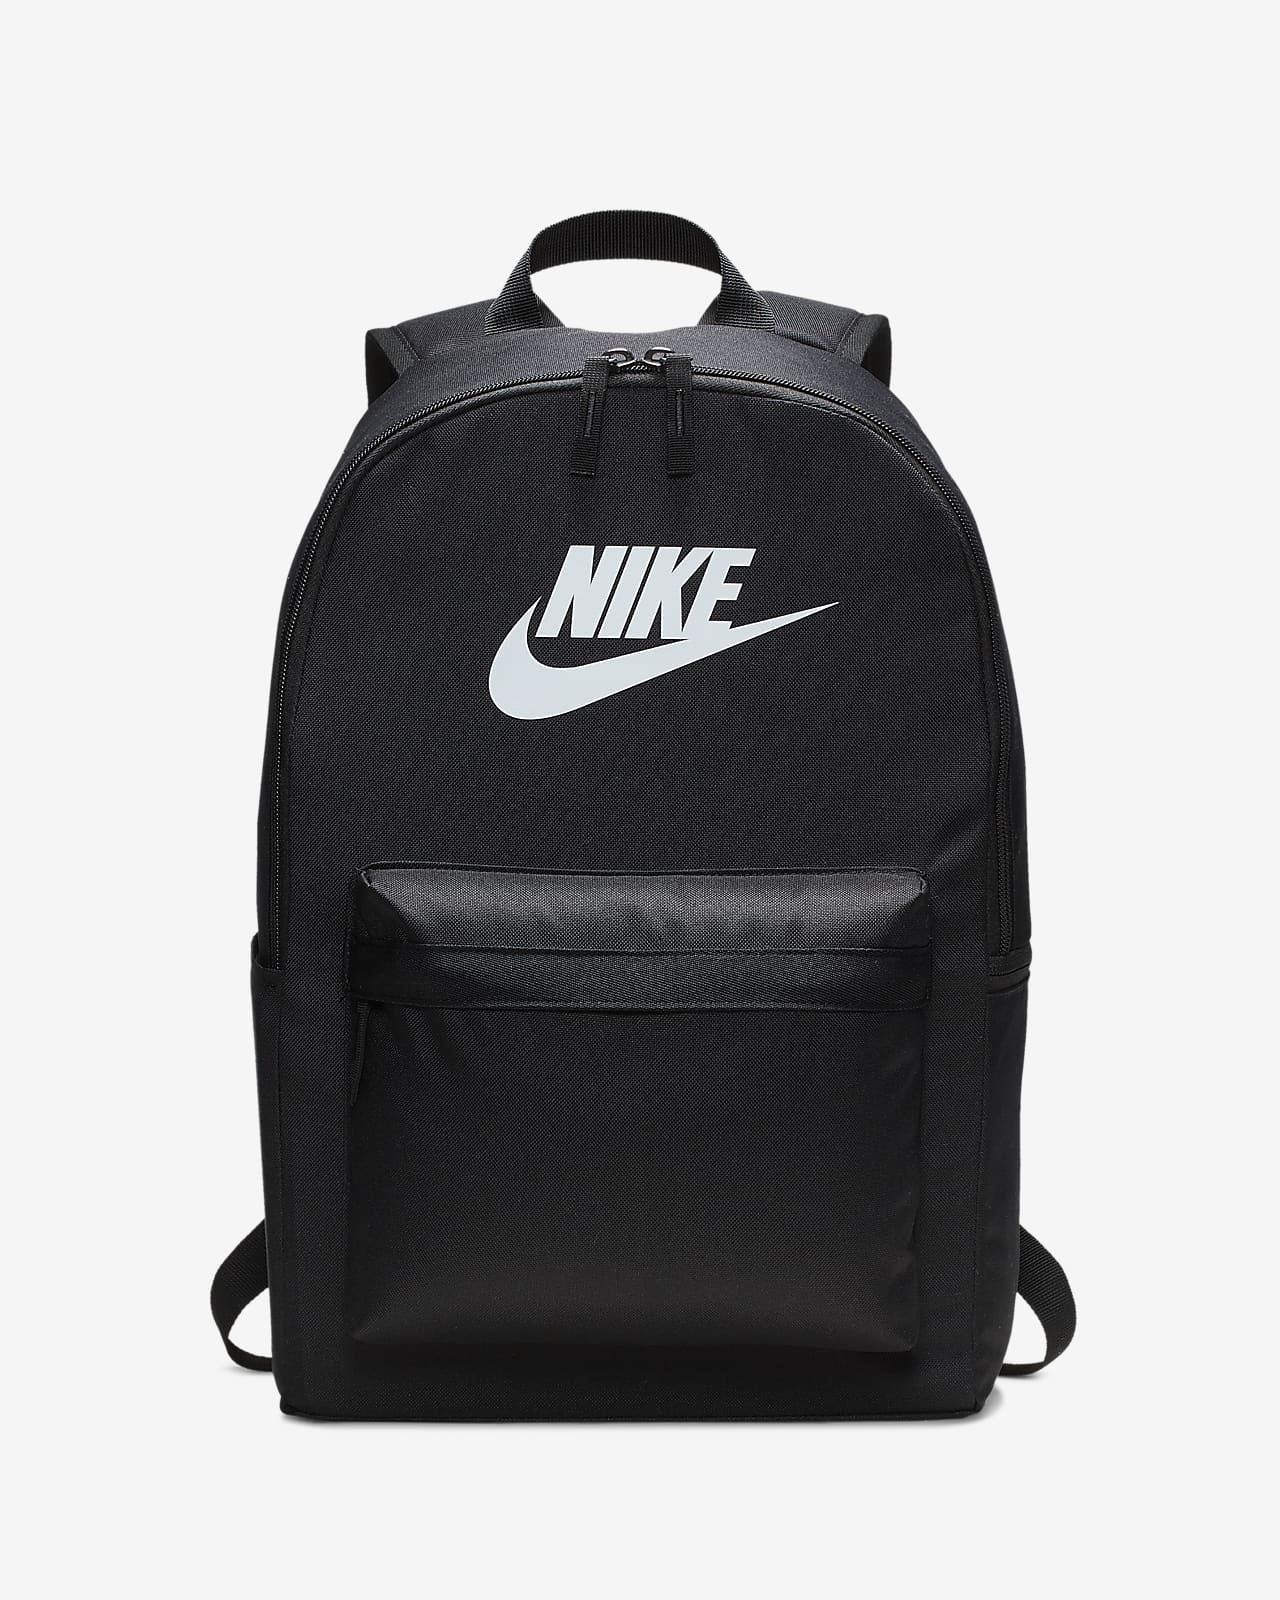 Two degrees Dedicate Squire Nike Heritage Backpack 2.0 Black Clearance, SAVE 45% - aveclumiere.com